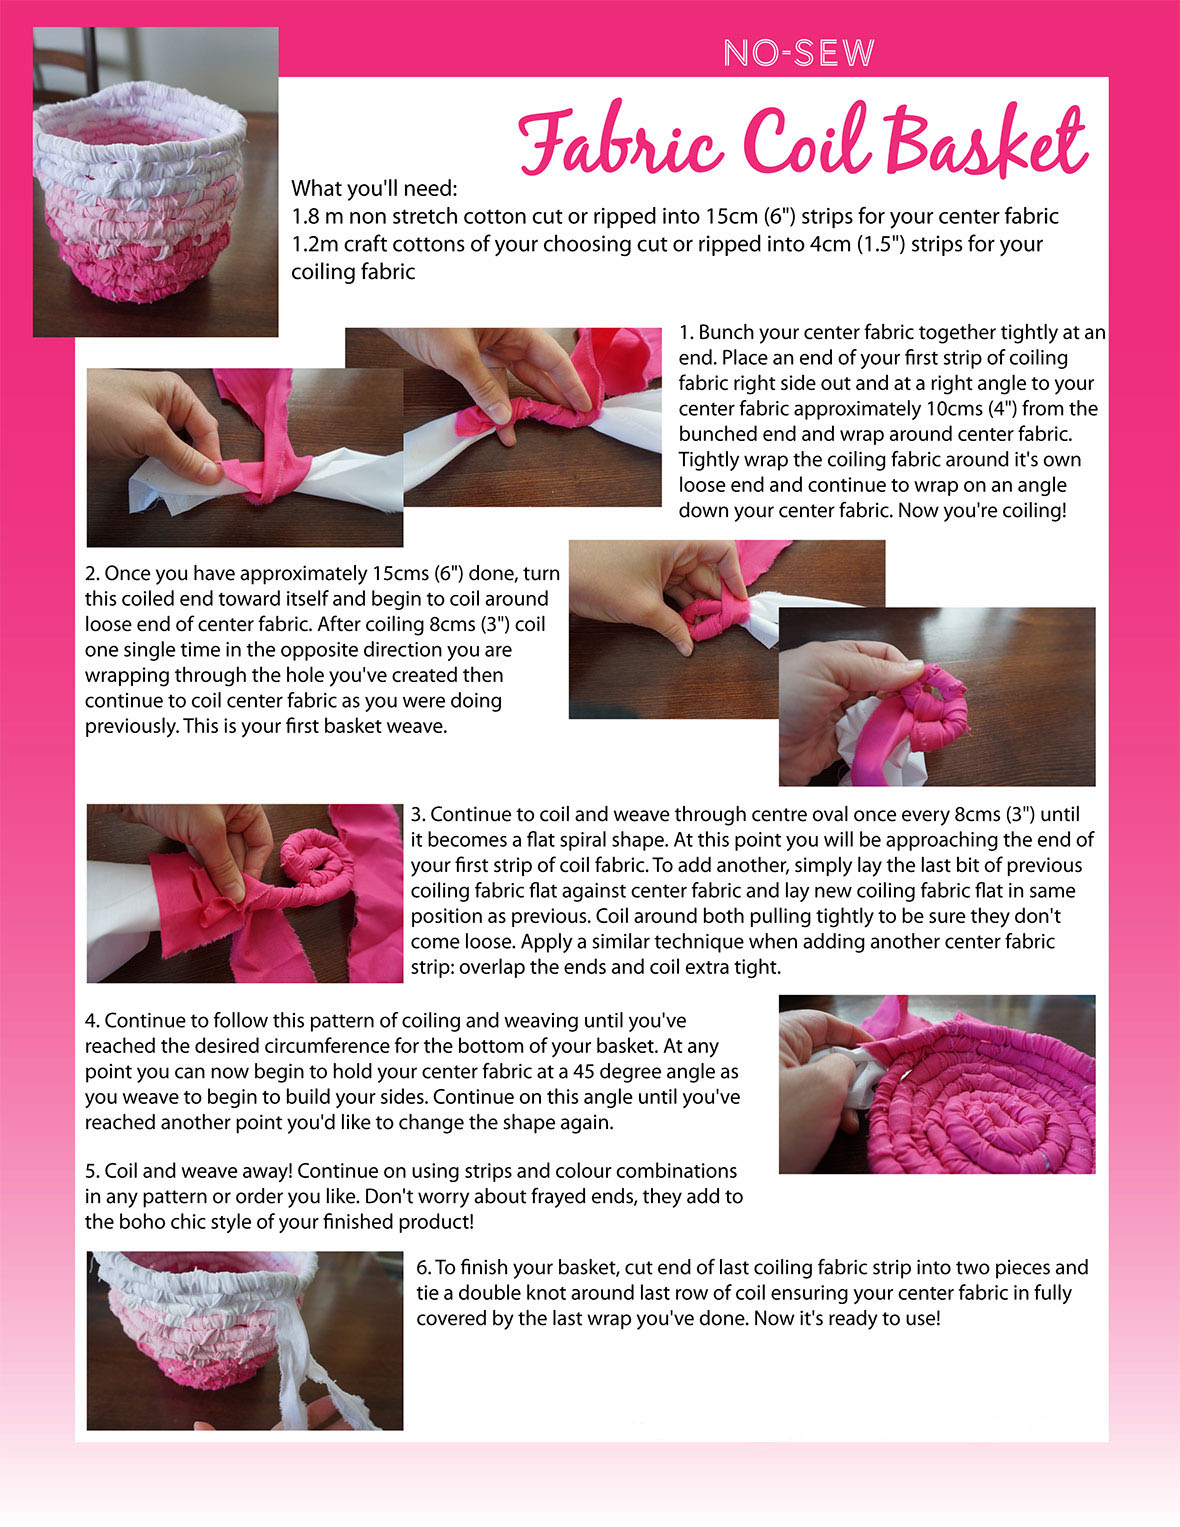 Steps to create your own no-sew fabric coil basket.